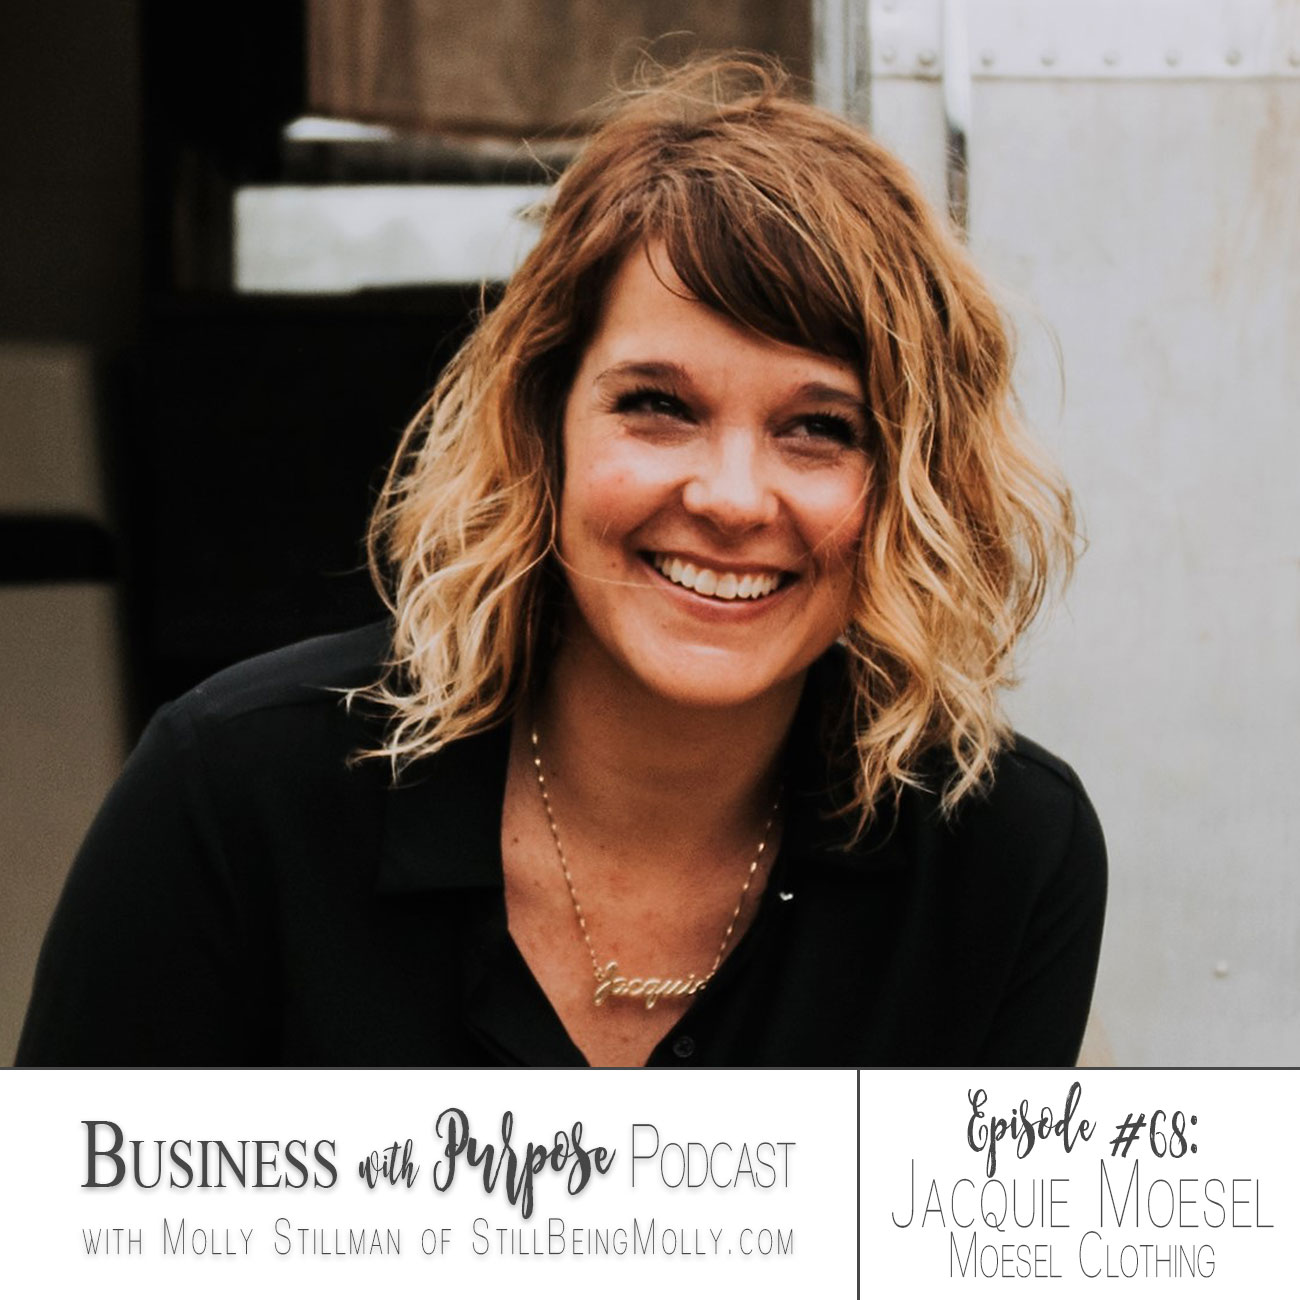 Business with Purpose Podcast EP 68: Jacquie Moesel, On Ethical Apprenticeships & Starting Moesel Clothing by North Carolina ethical blogger Still Being Molly